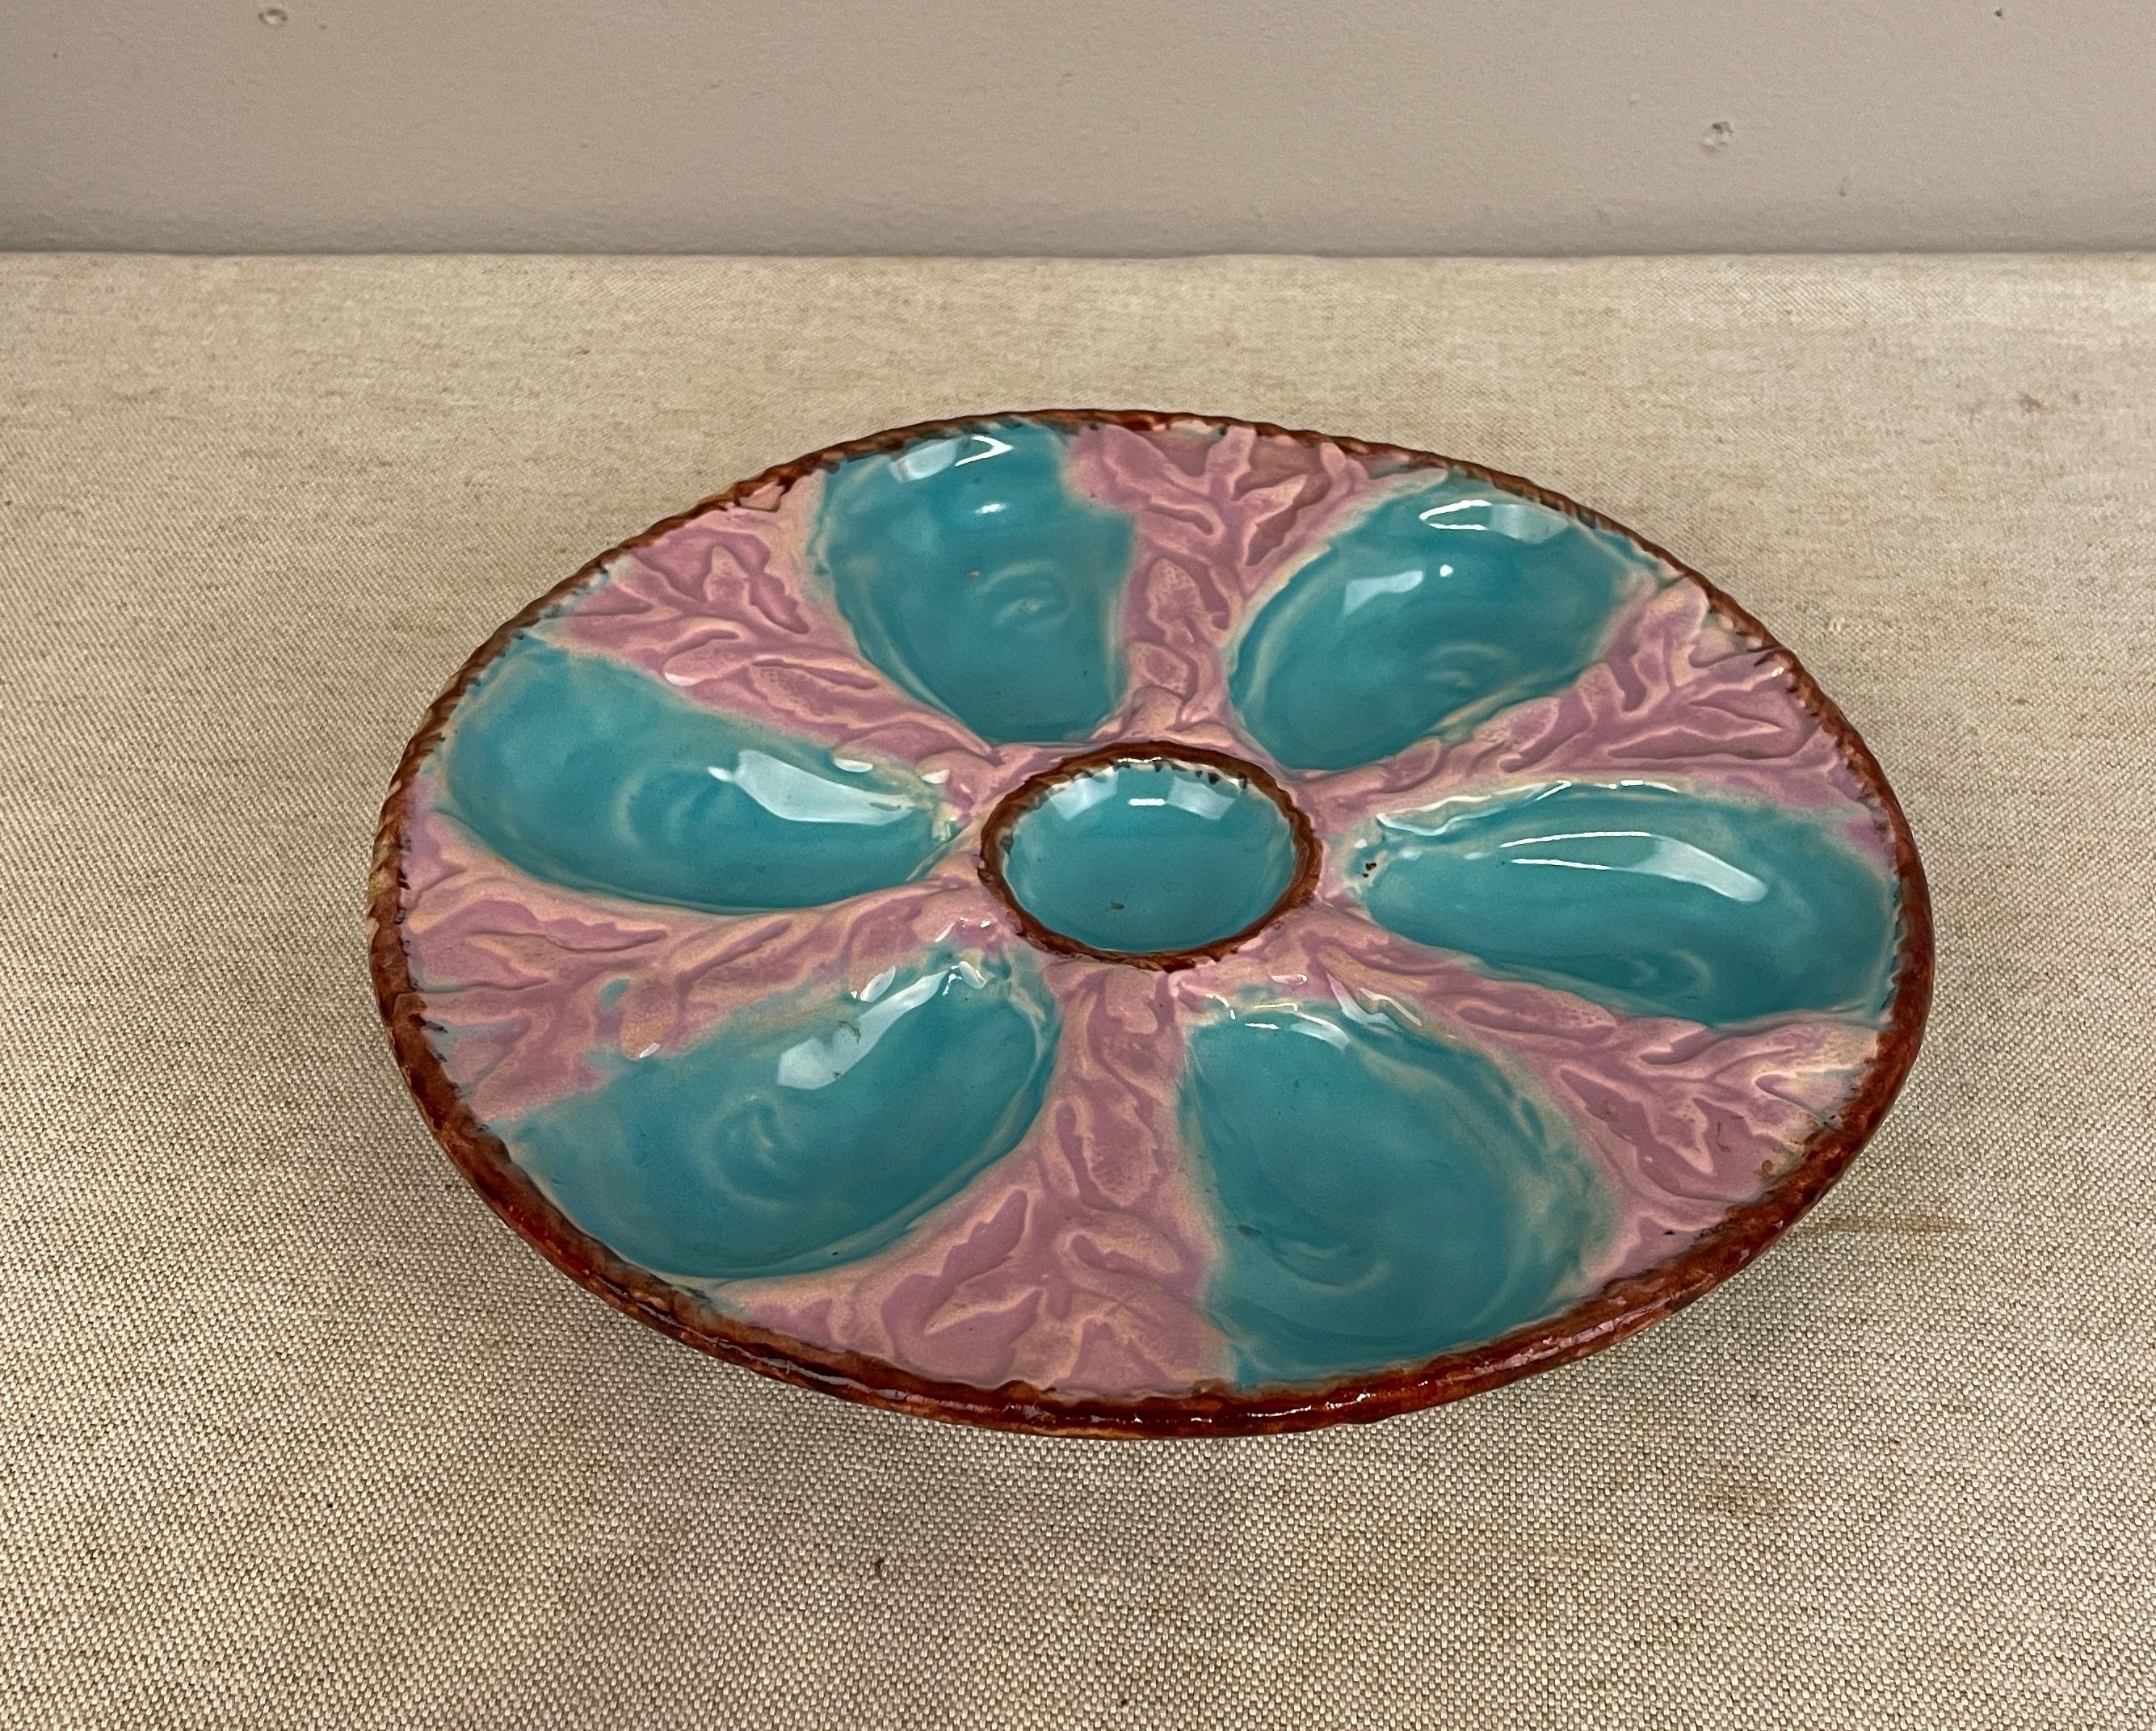 A 19th c English Oyster Plate with six-well majolica glazed oyster plate by Fielding & Co. Ltd., Stoke-on-Trent, England, circa 1875-1880.. Turquoise oyster wells surround a center well. A chocolate brown nautical rope border encircles the center